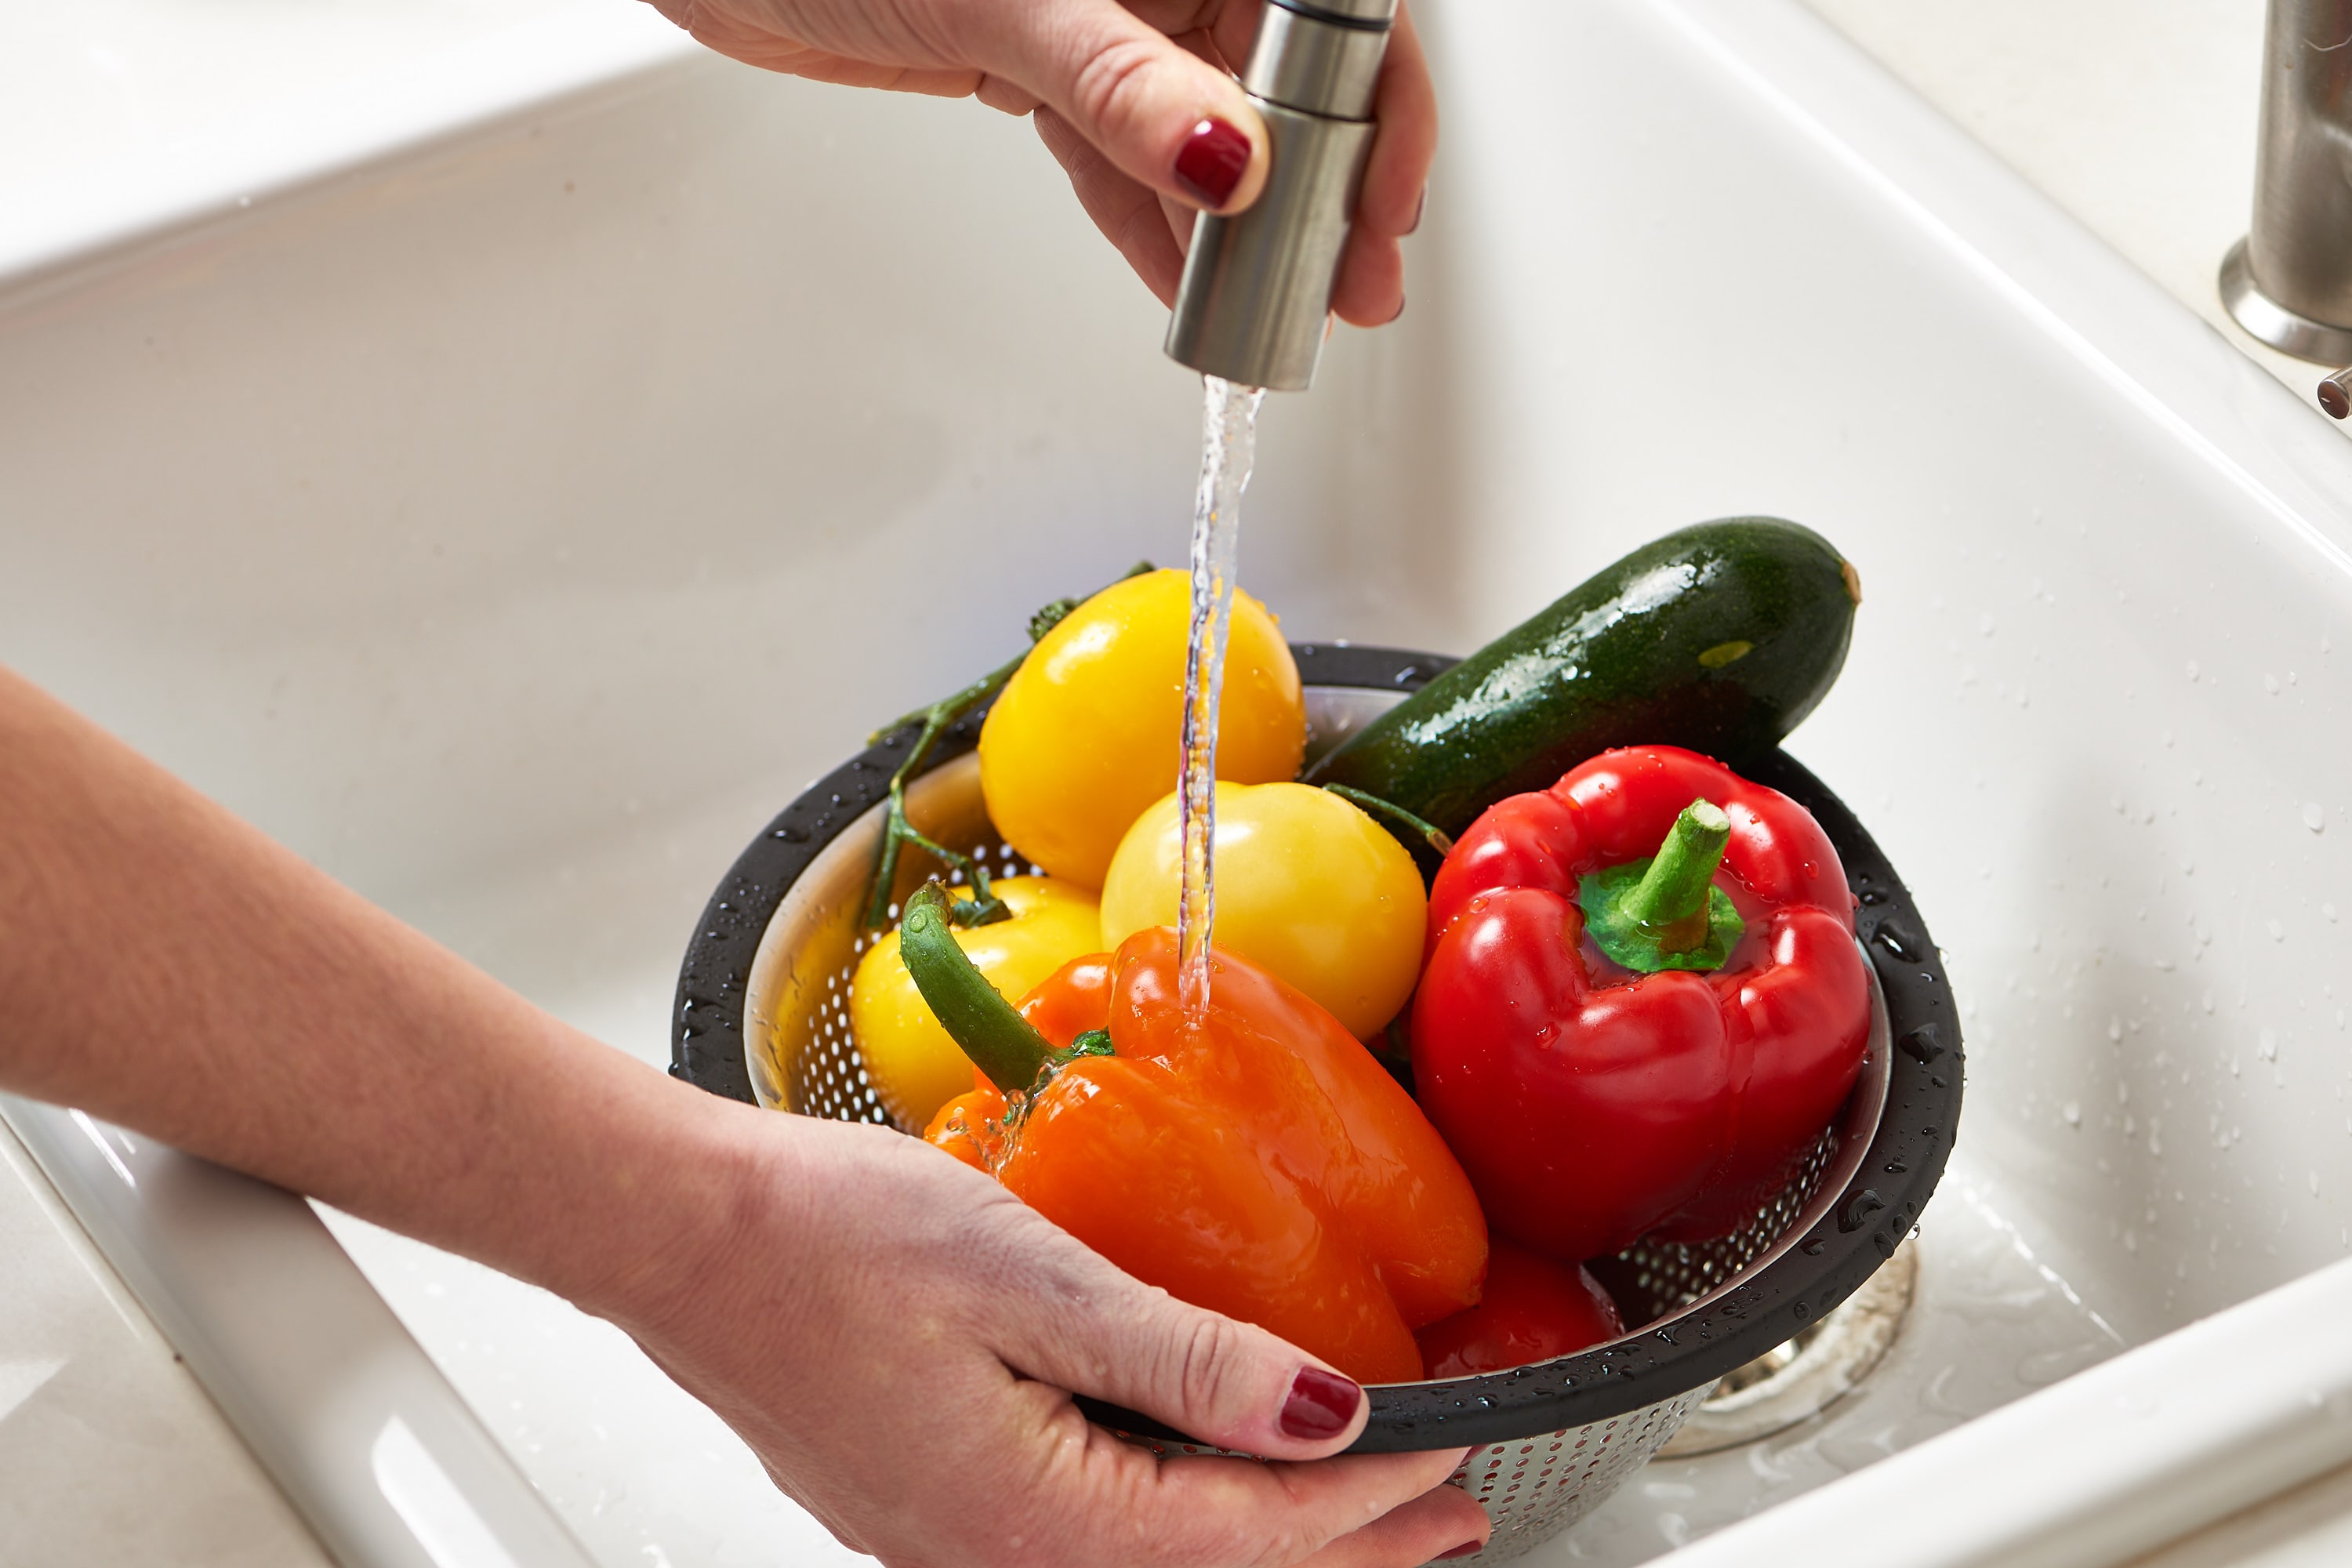 Best Way to Wash Vegetables for Effective Germ Removal